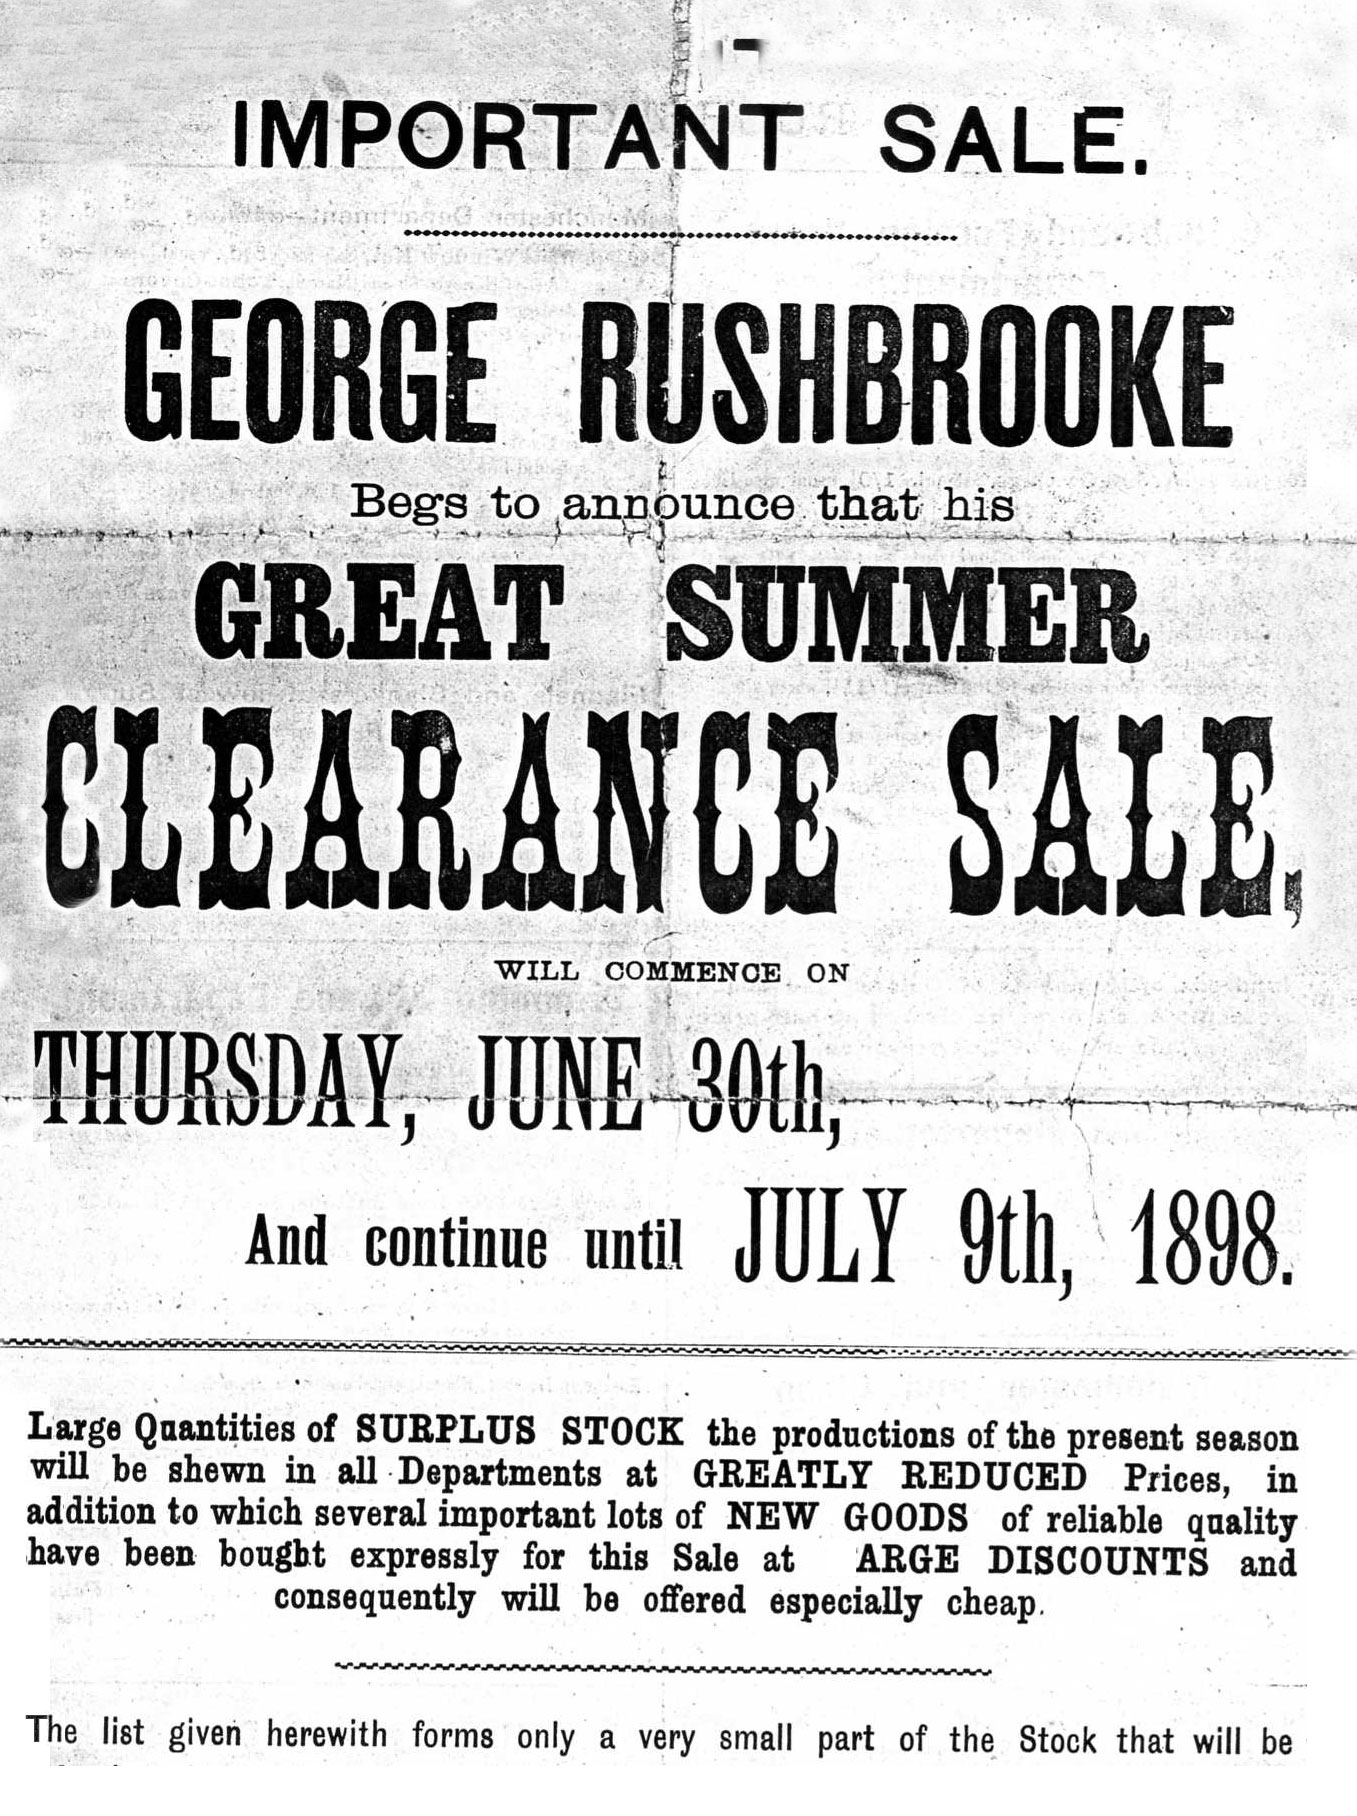 G Rushbrookes Clearance Sale poster - Ampthill Antiques Emporium